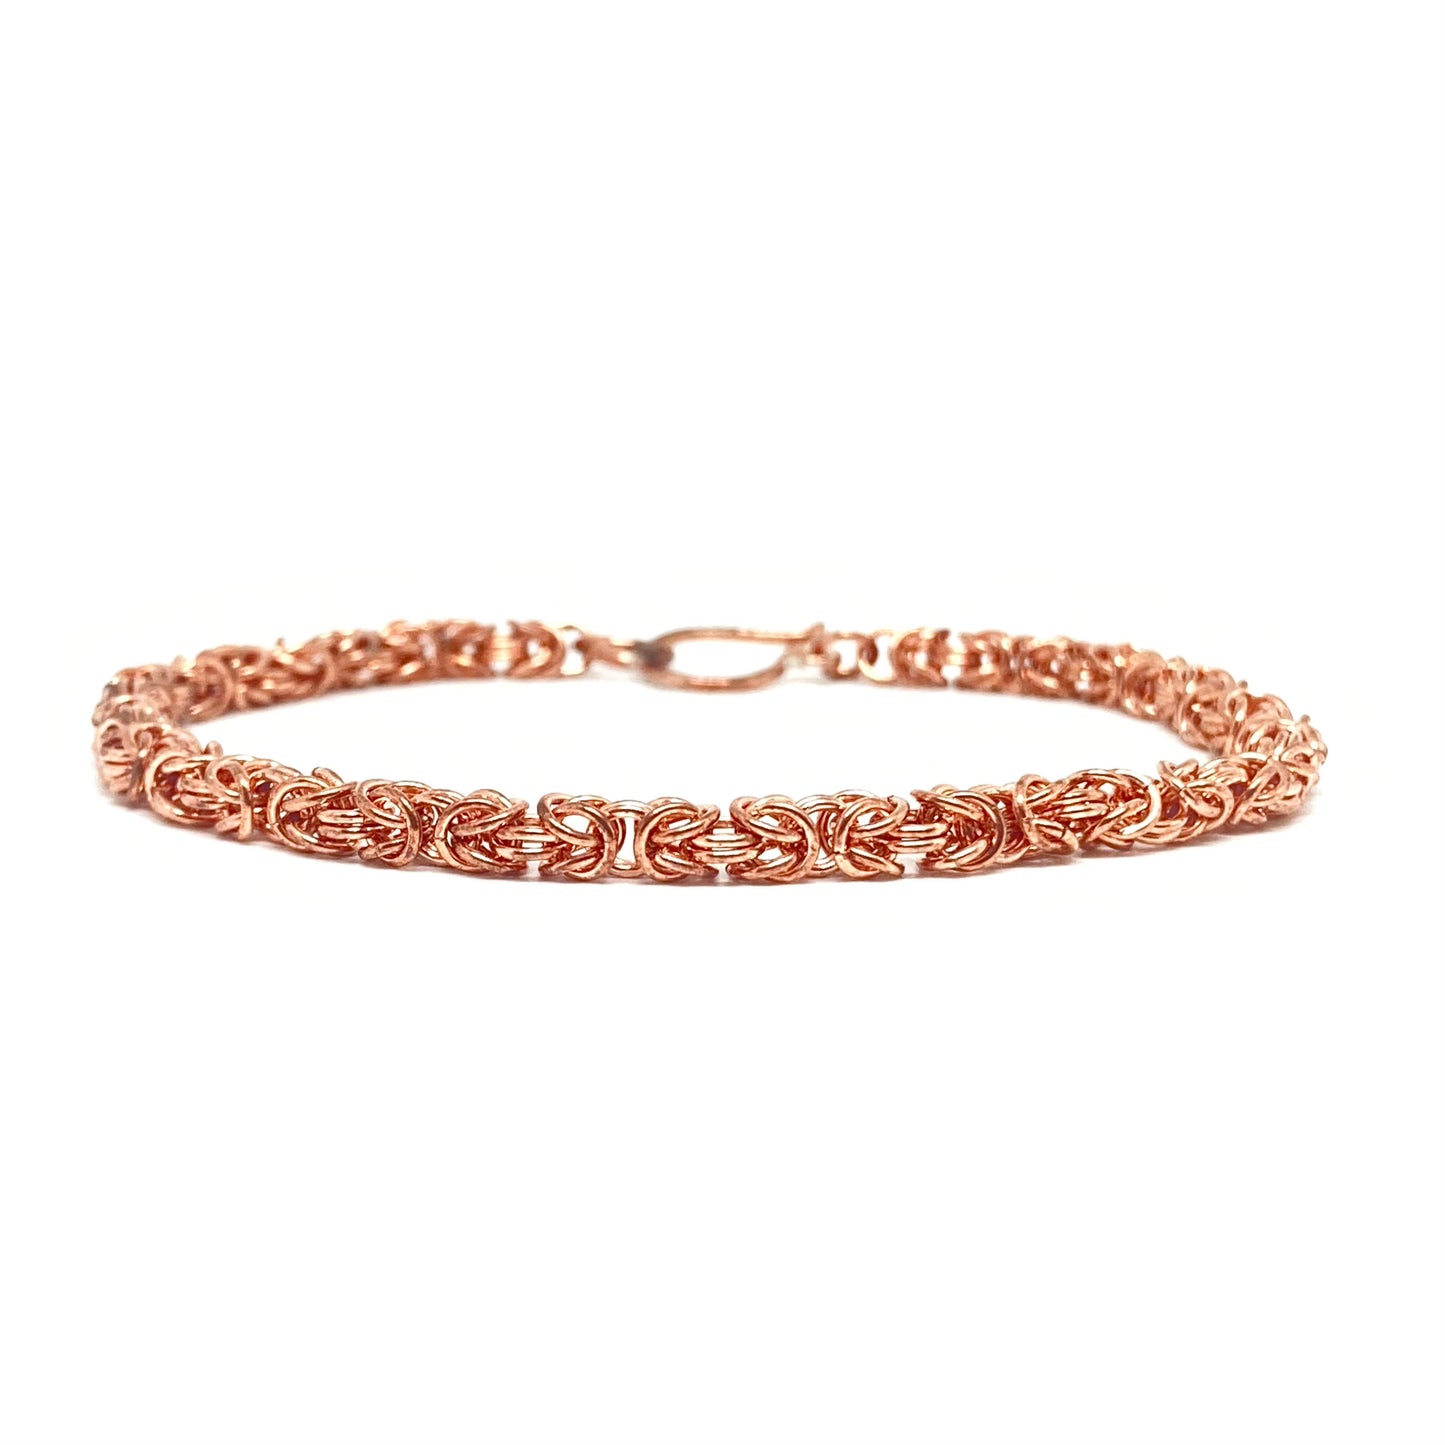 Delicate Byzantine Chainmaille Bracelet in Copper